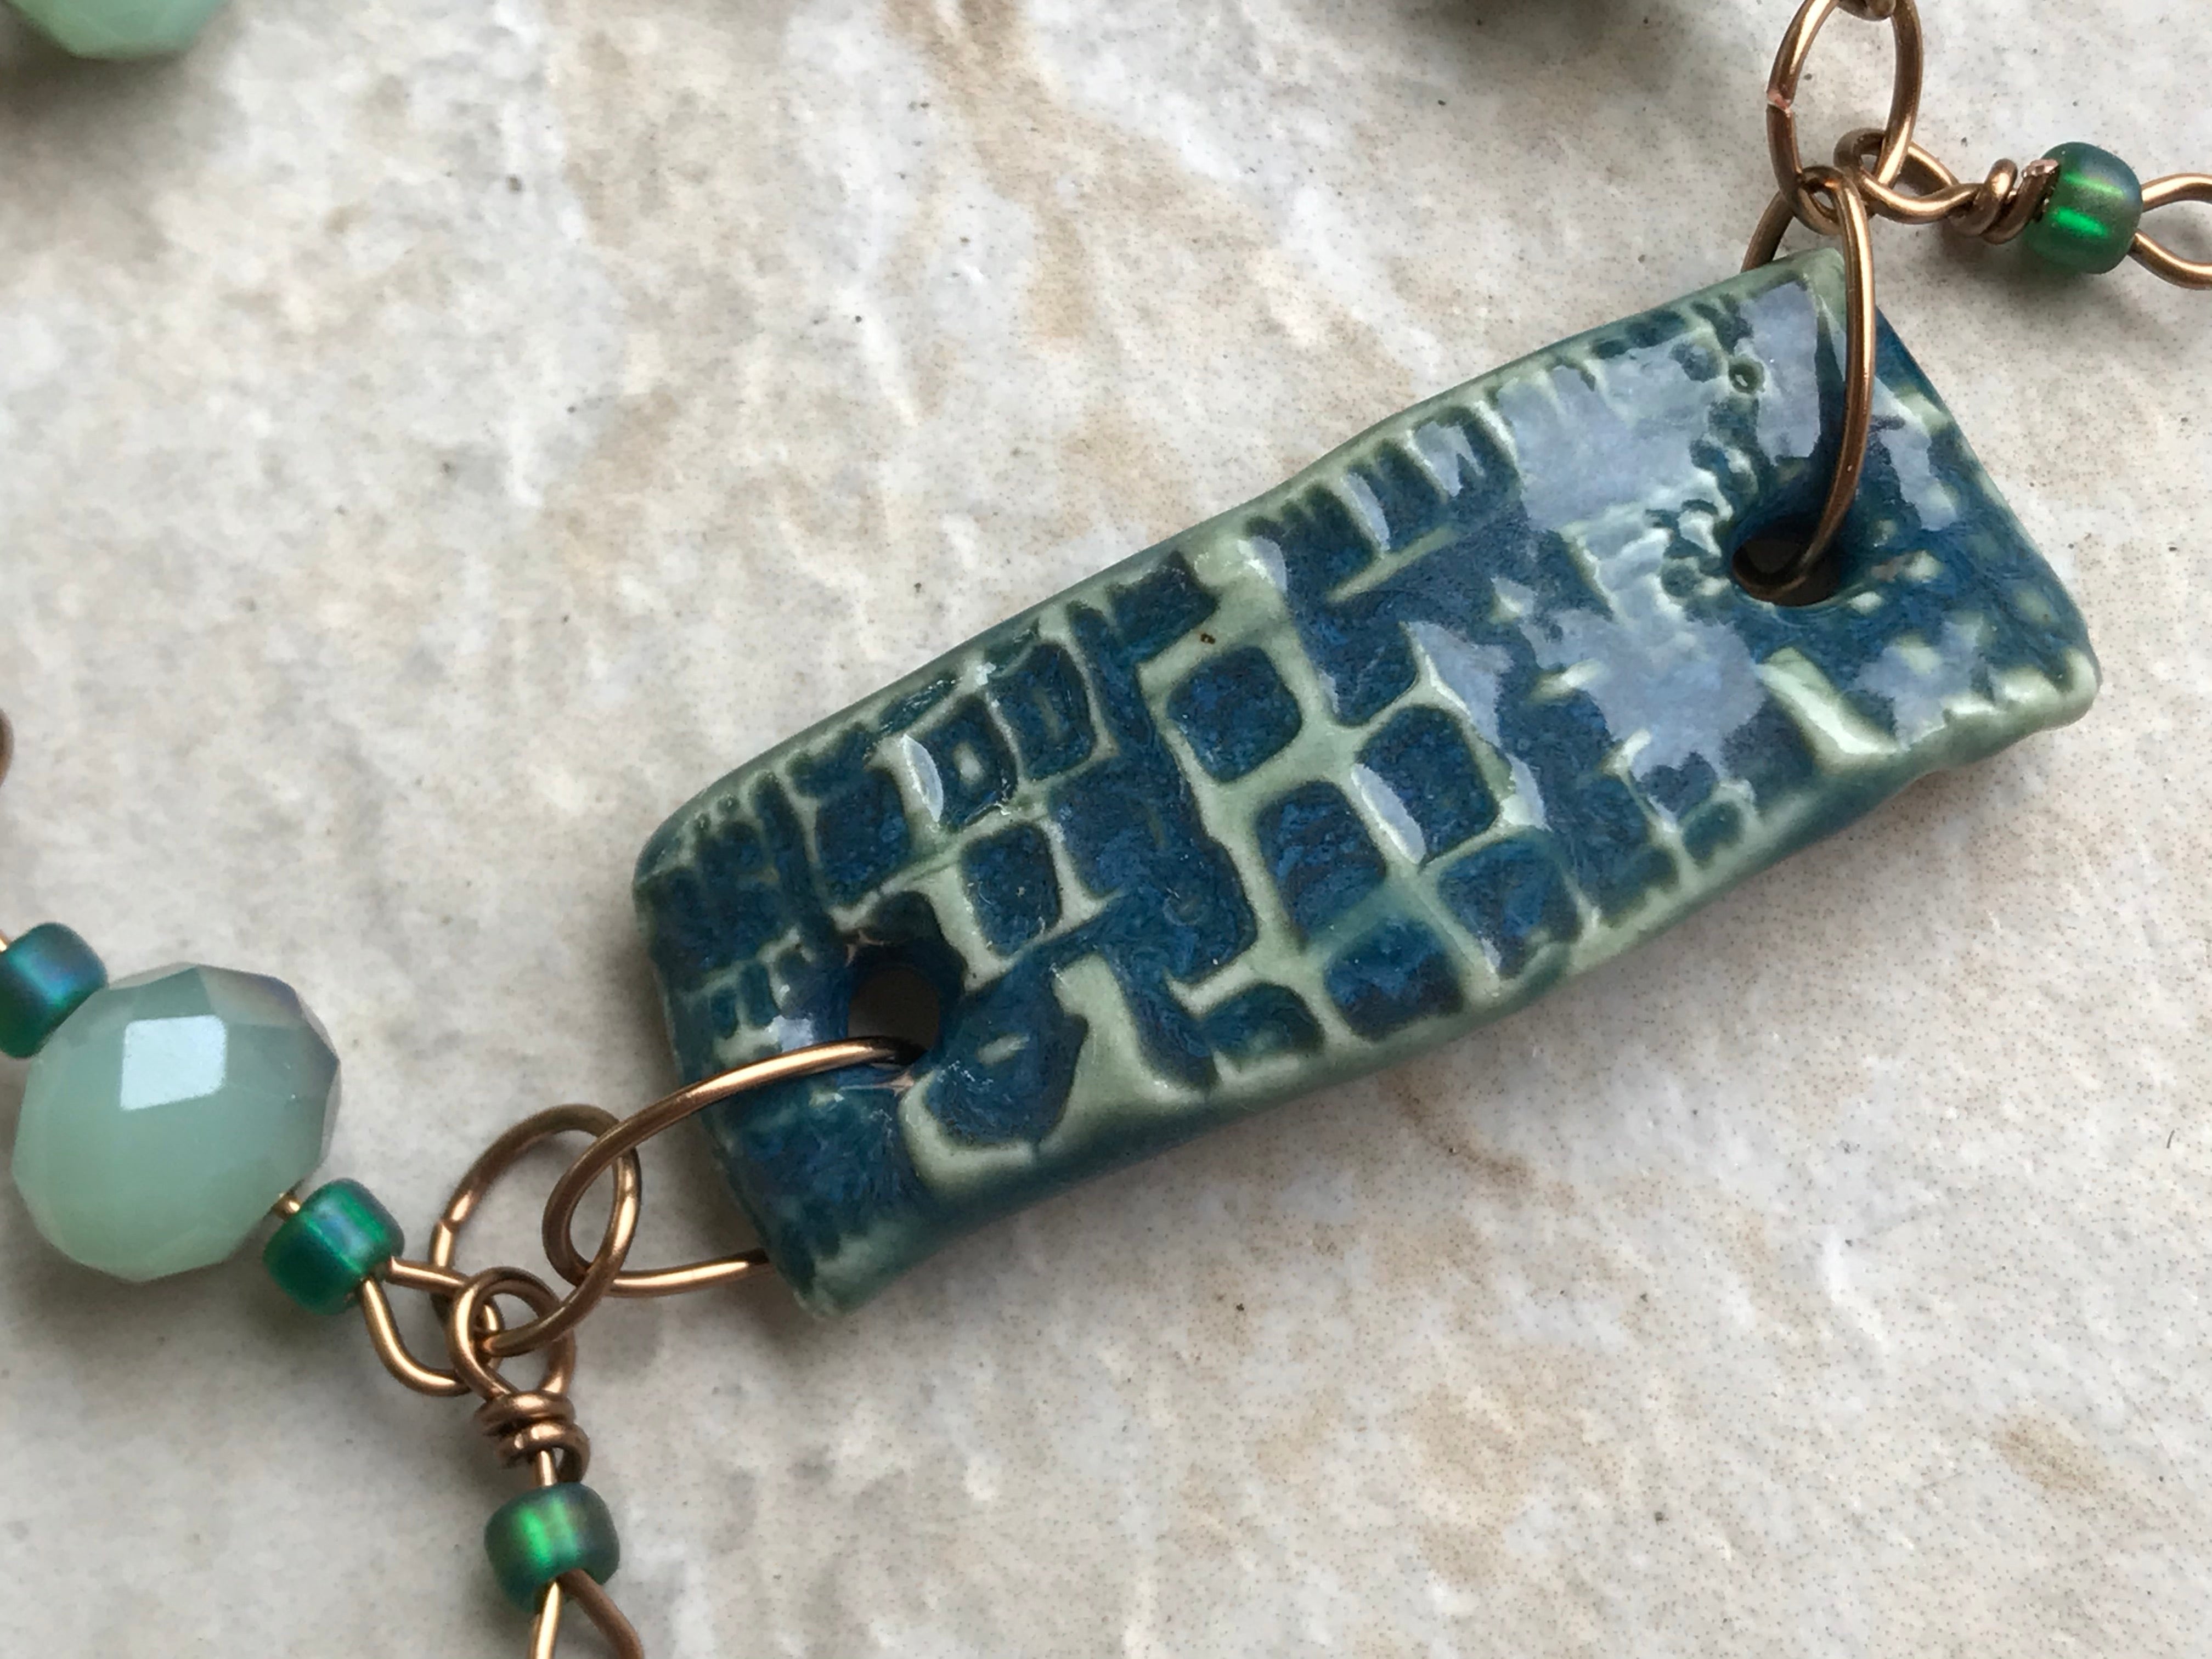 Twilight Turquoise Beaded Bracelet with Celadon Accents and Fish Clasp